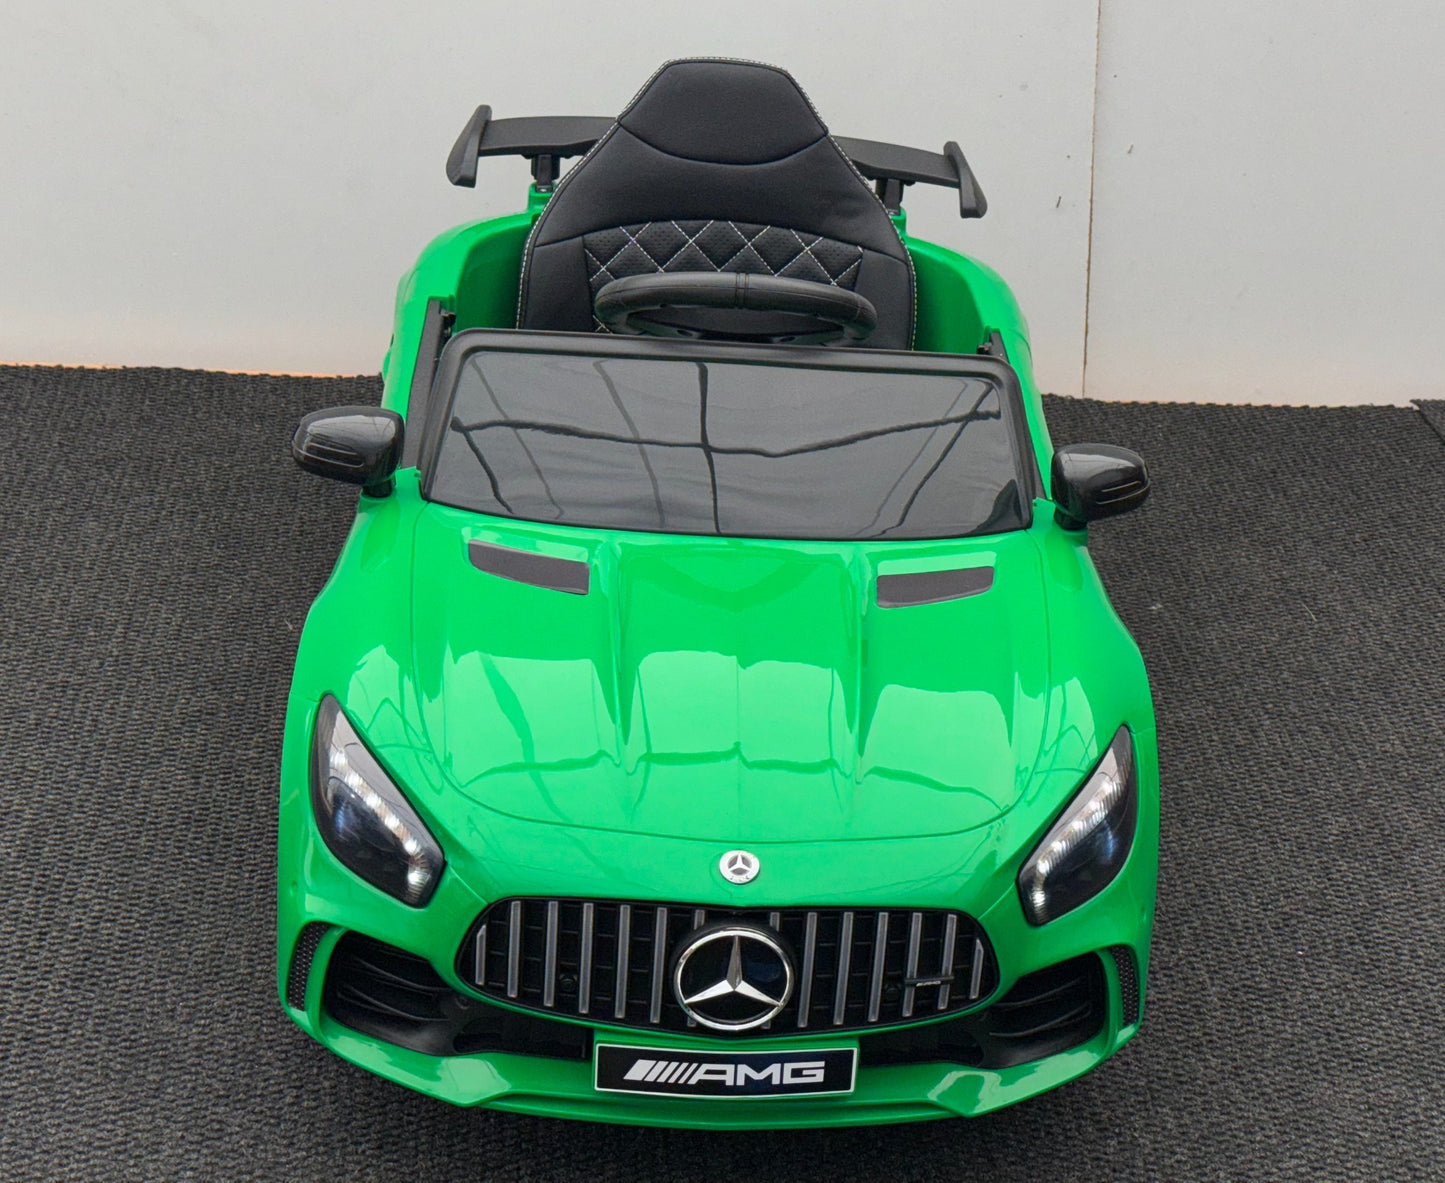 LICENSED MERCEDES AMG  12V 1 SEAT WITH PARENTAL REMOTE, LEATHER SEAT